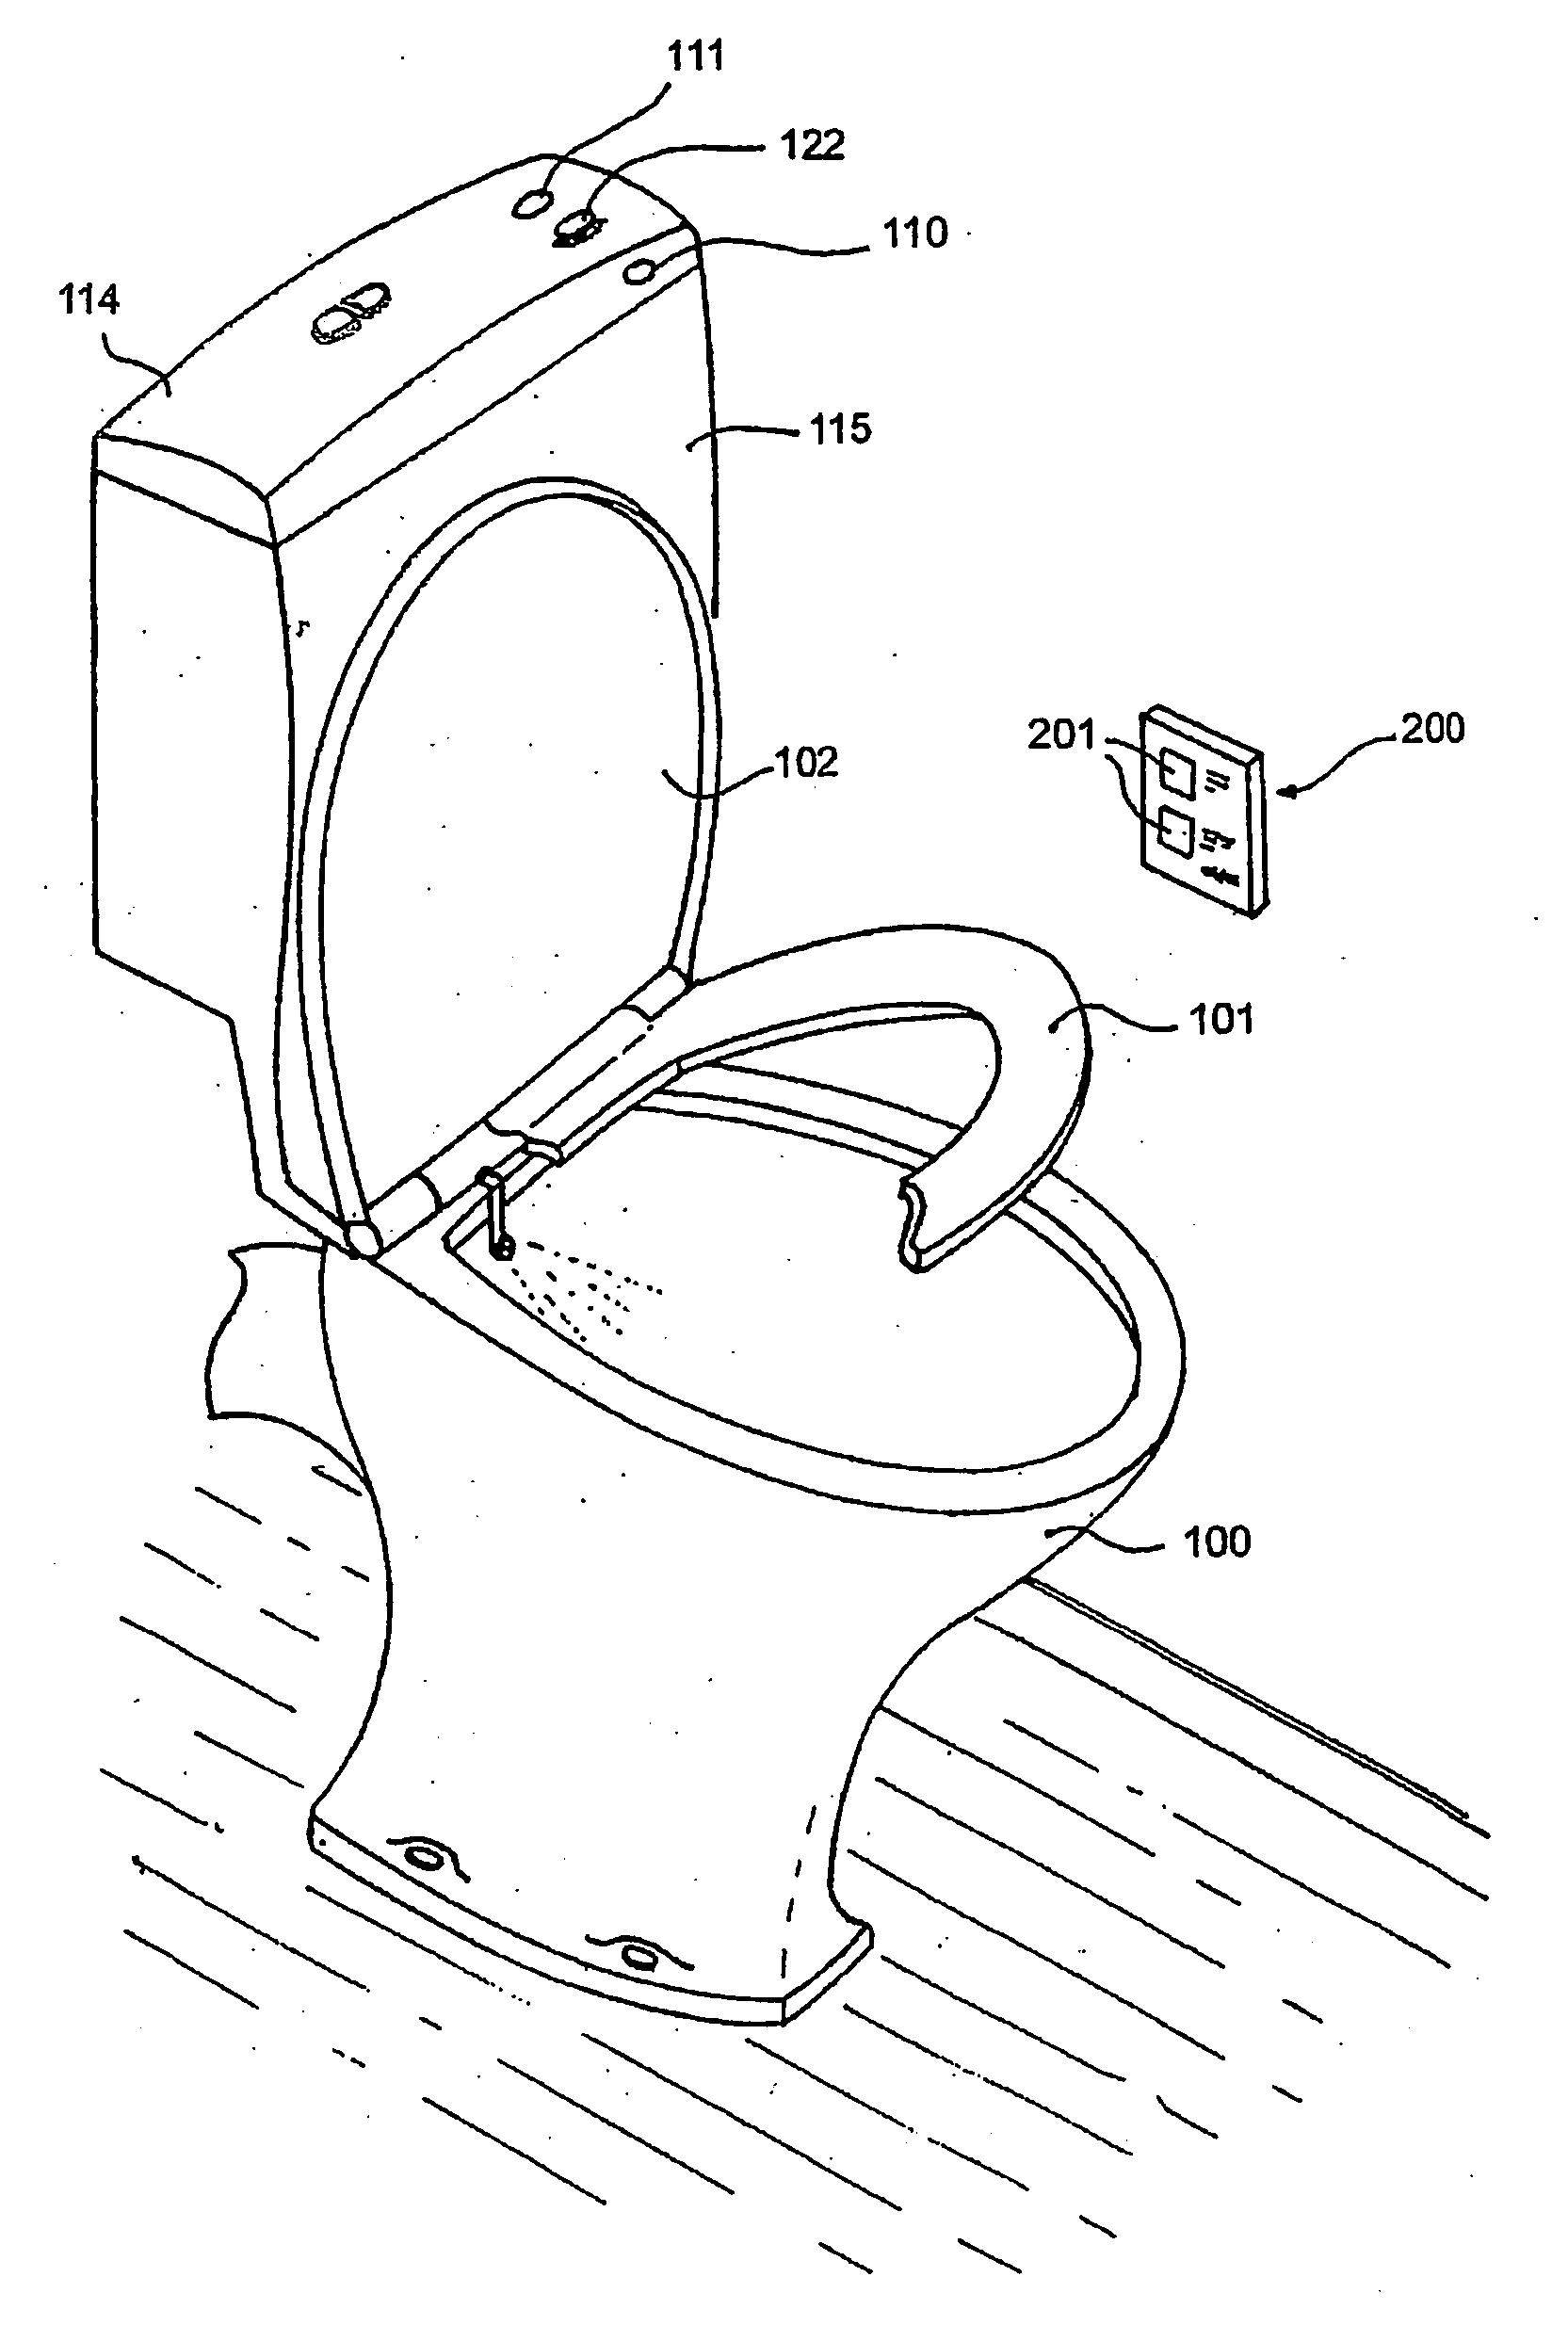 Powered toilet & seat assembly